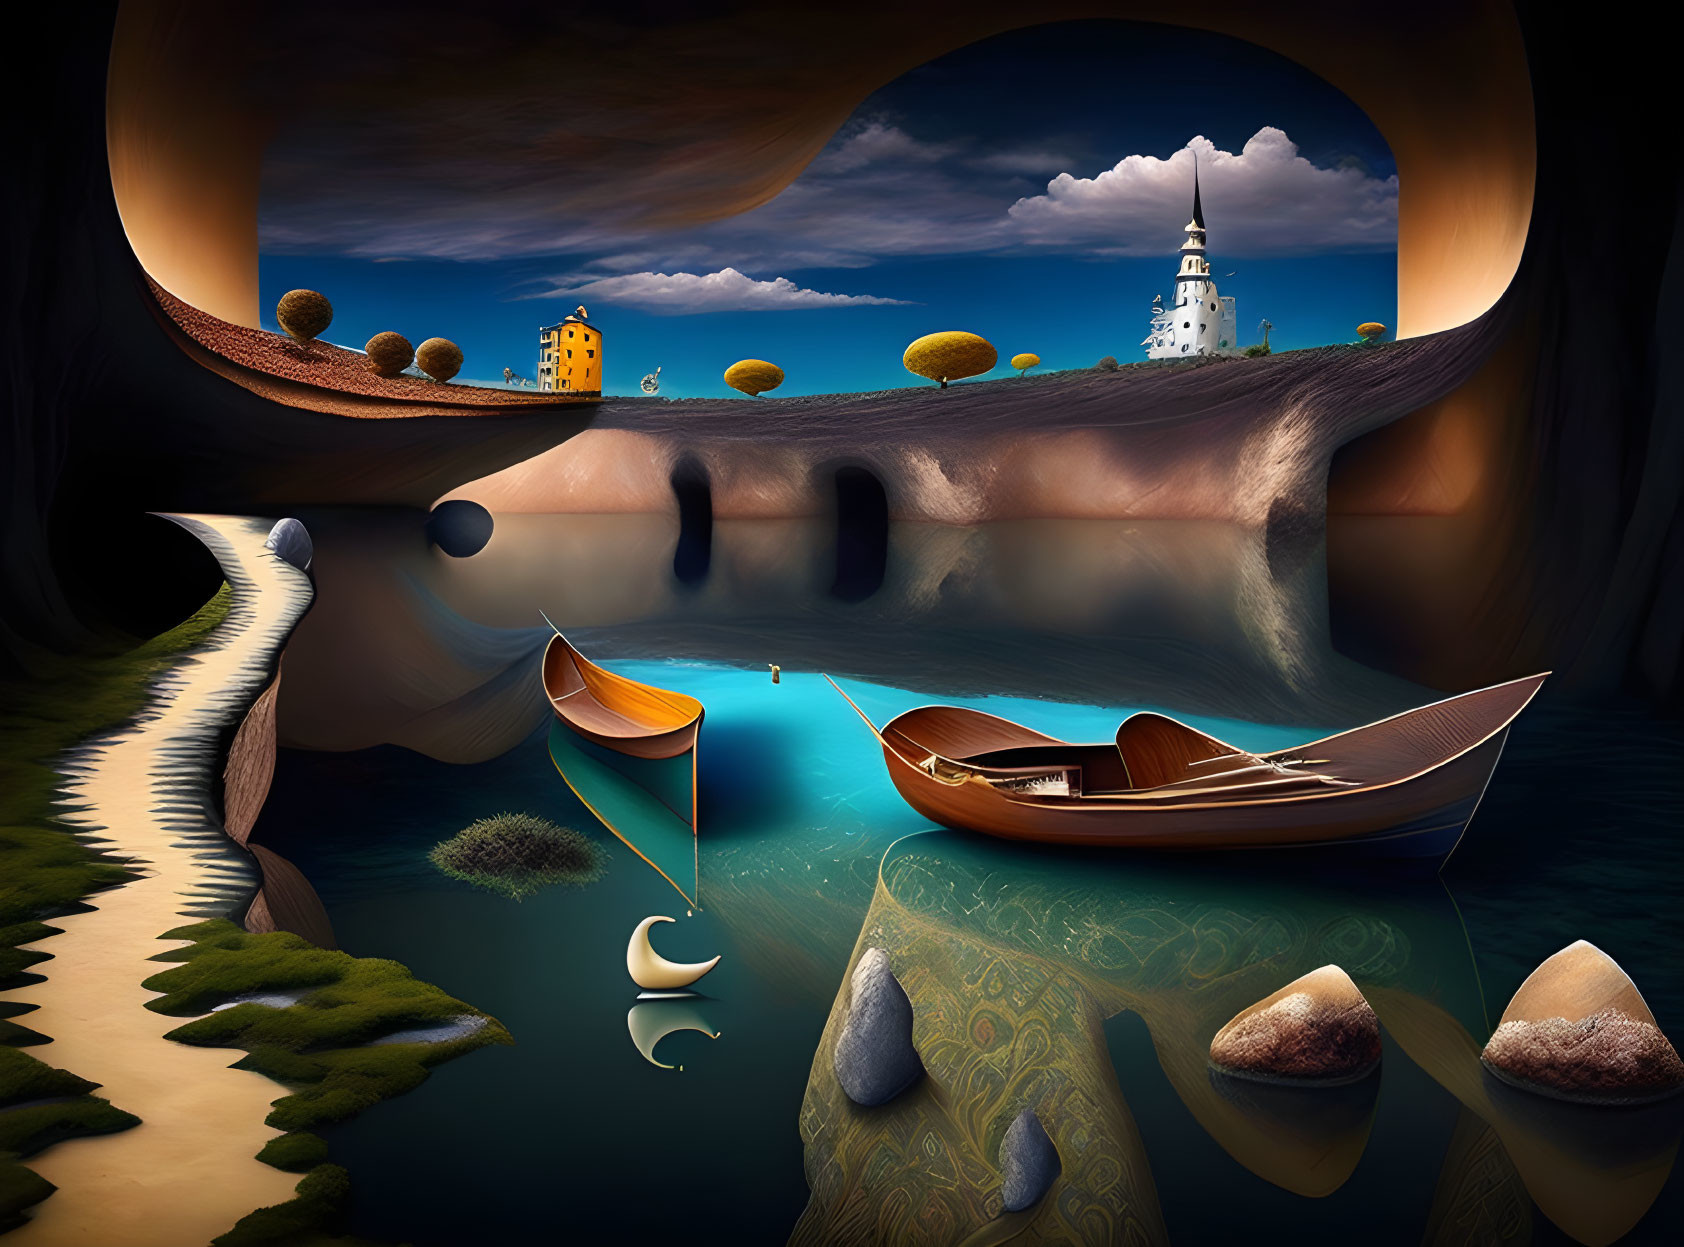 Surreal landscape featuring wooden boats, river, whimsical buildings, and winding path at twilight